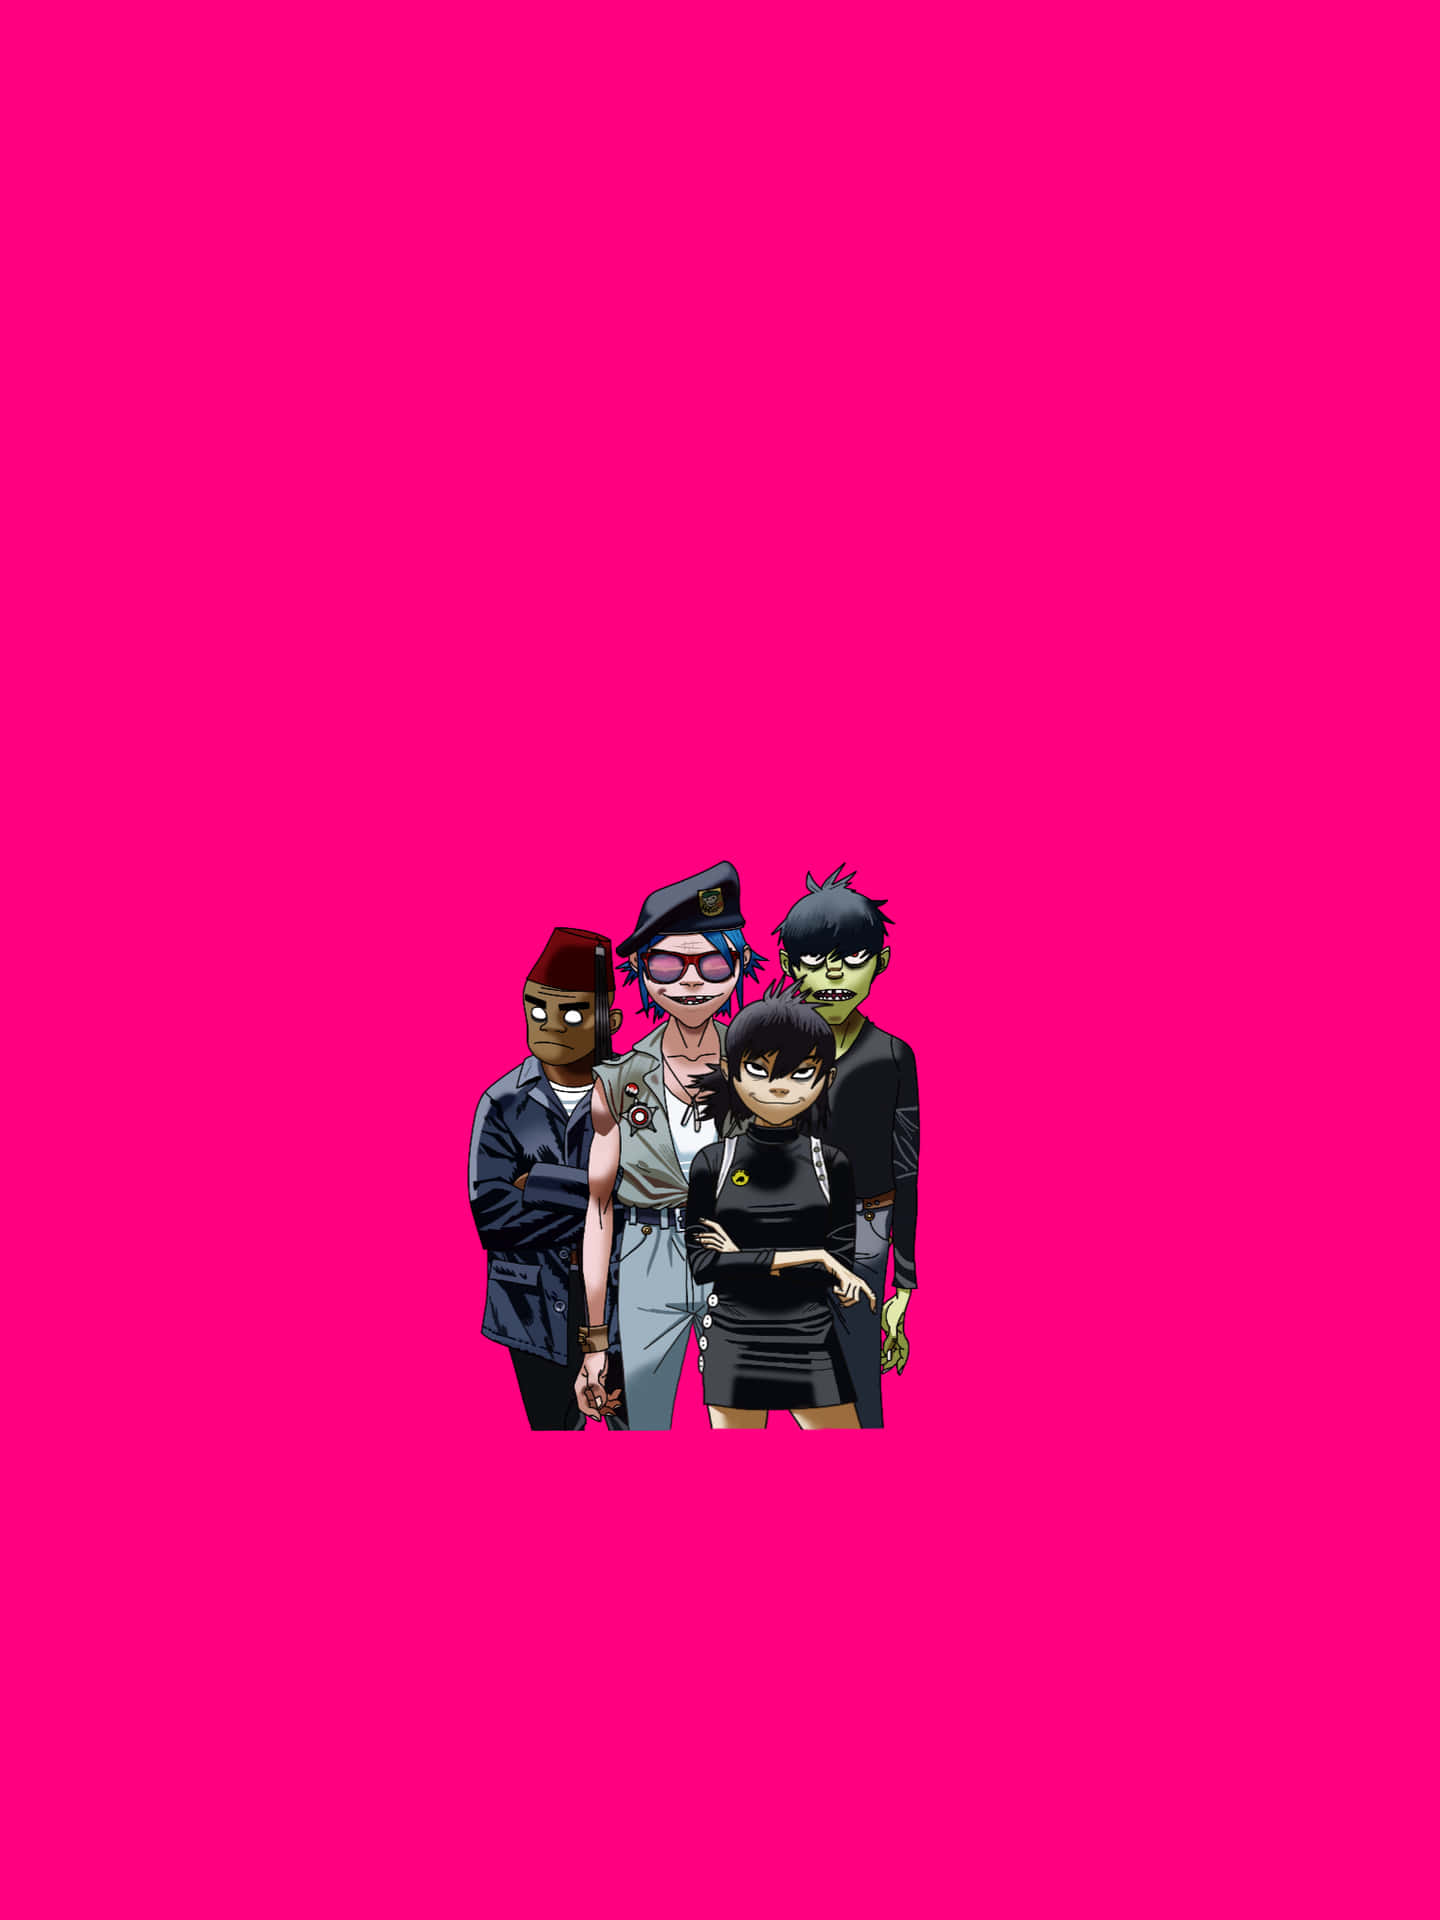 Gorillaz Iphone Band Members Pink Background